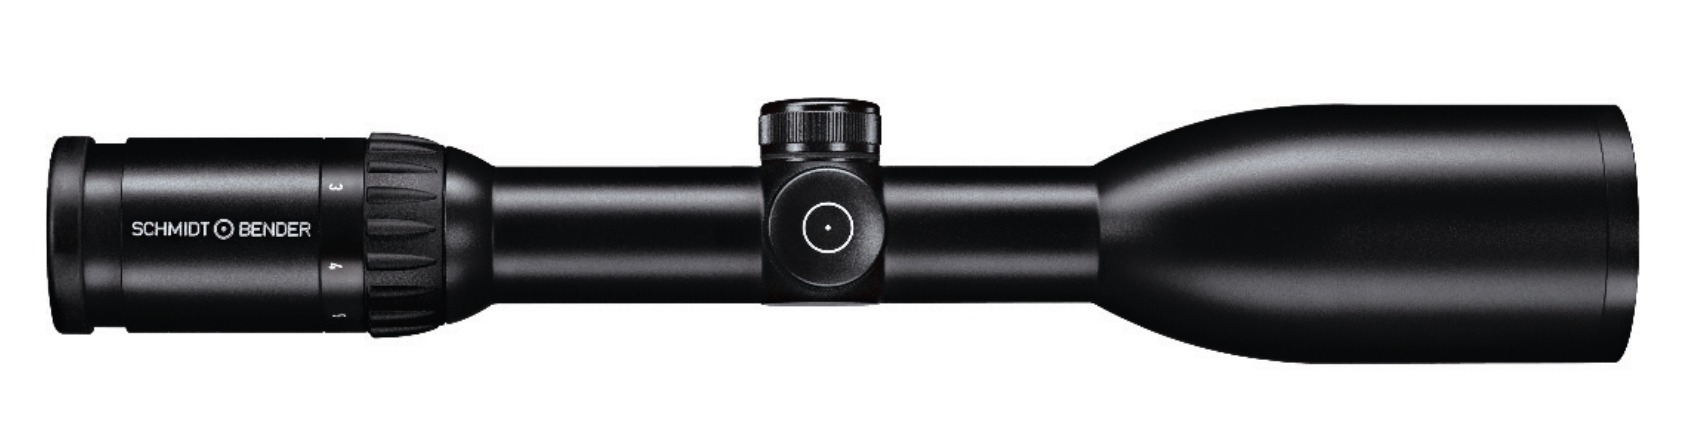 Schmidt and Bender Zenith 3-12x50mm riflescope with "non-magnifying" reticle.